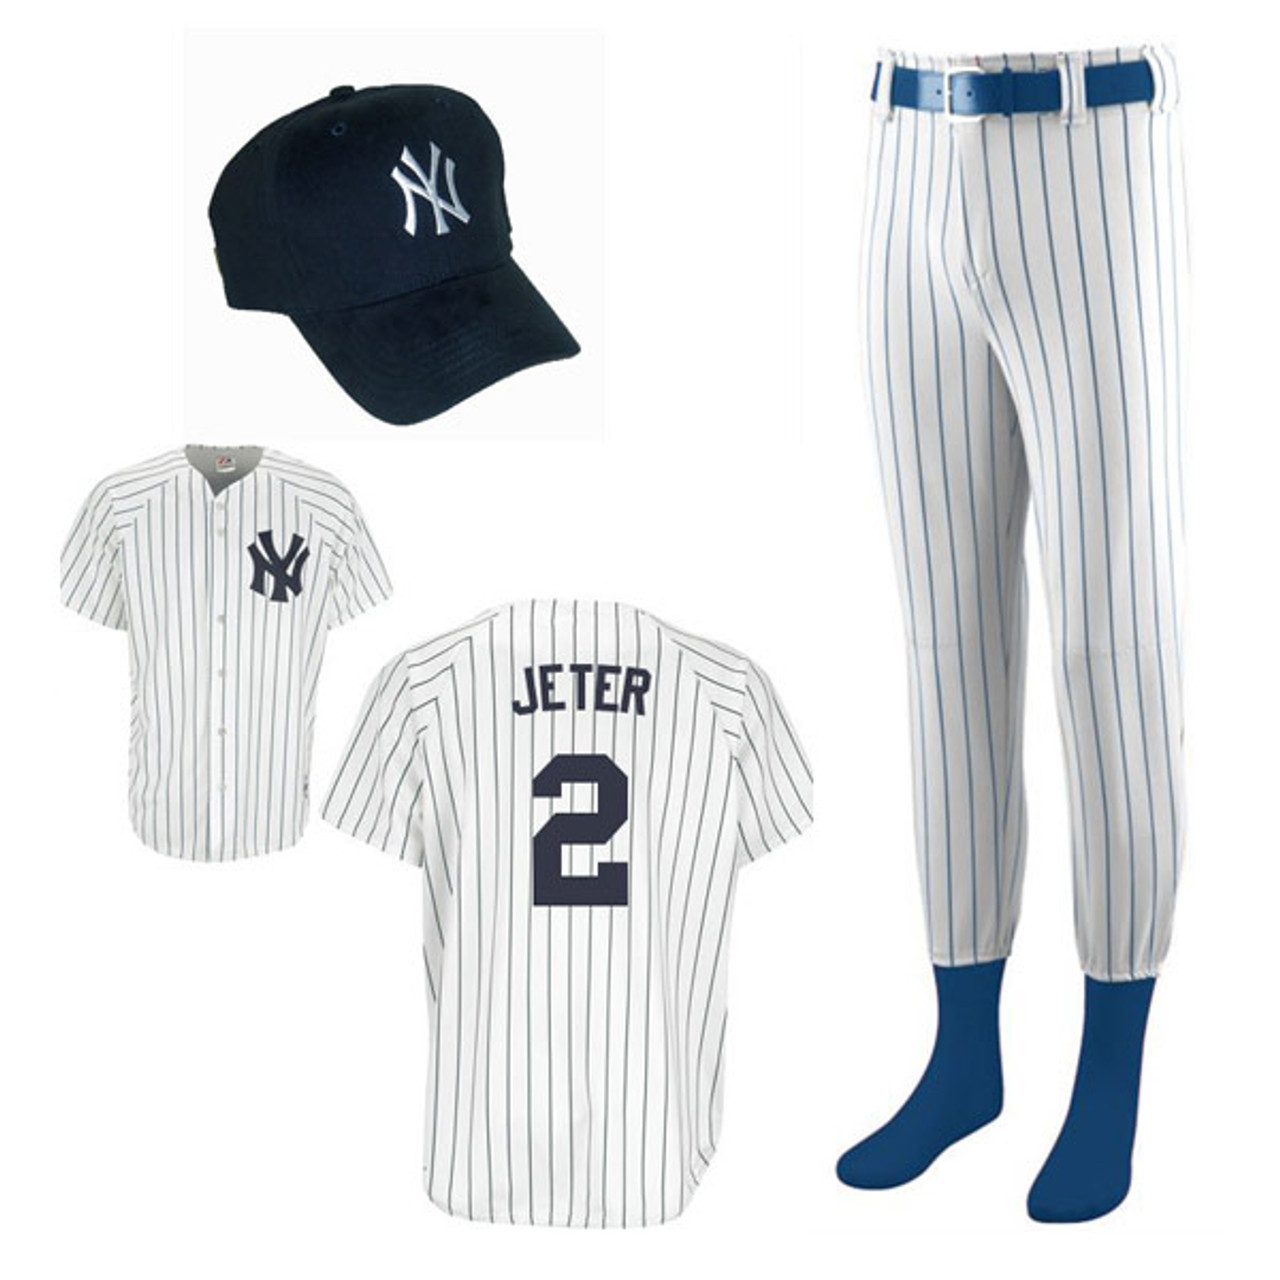 Derek Jeter Costume for Kids Ages 7 and Up